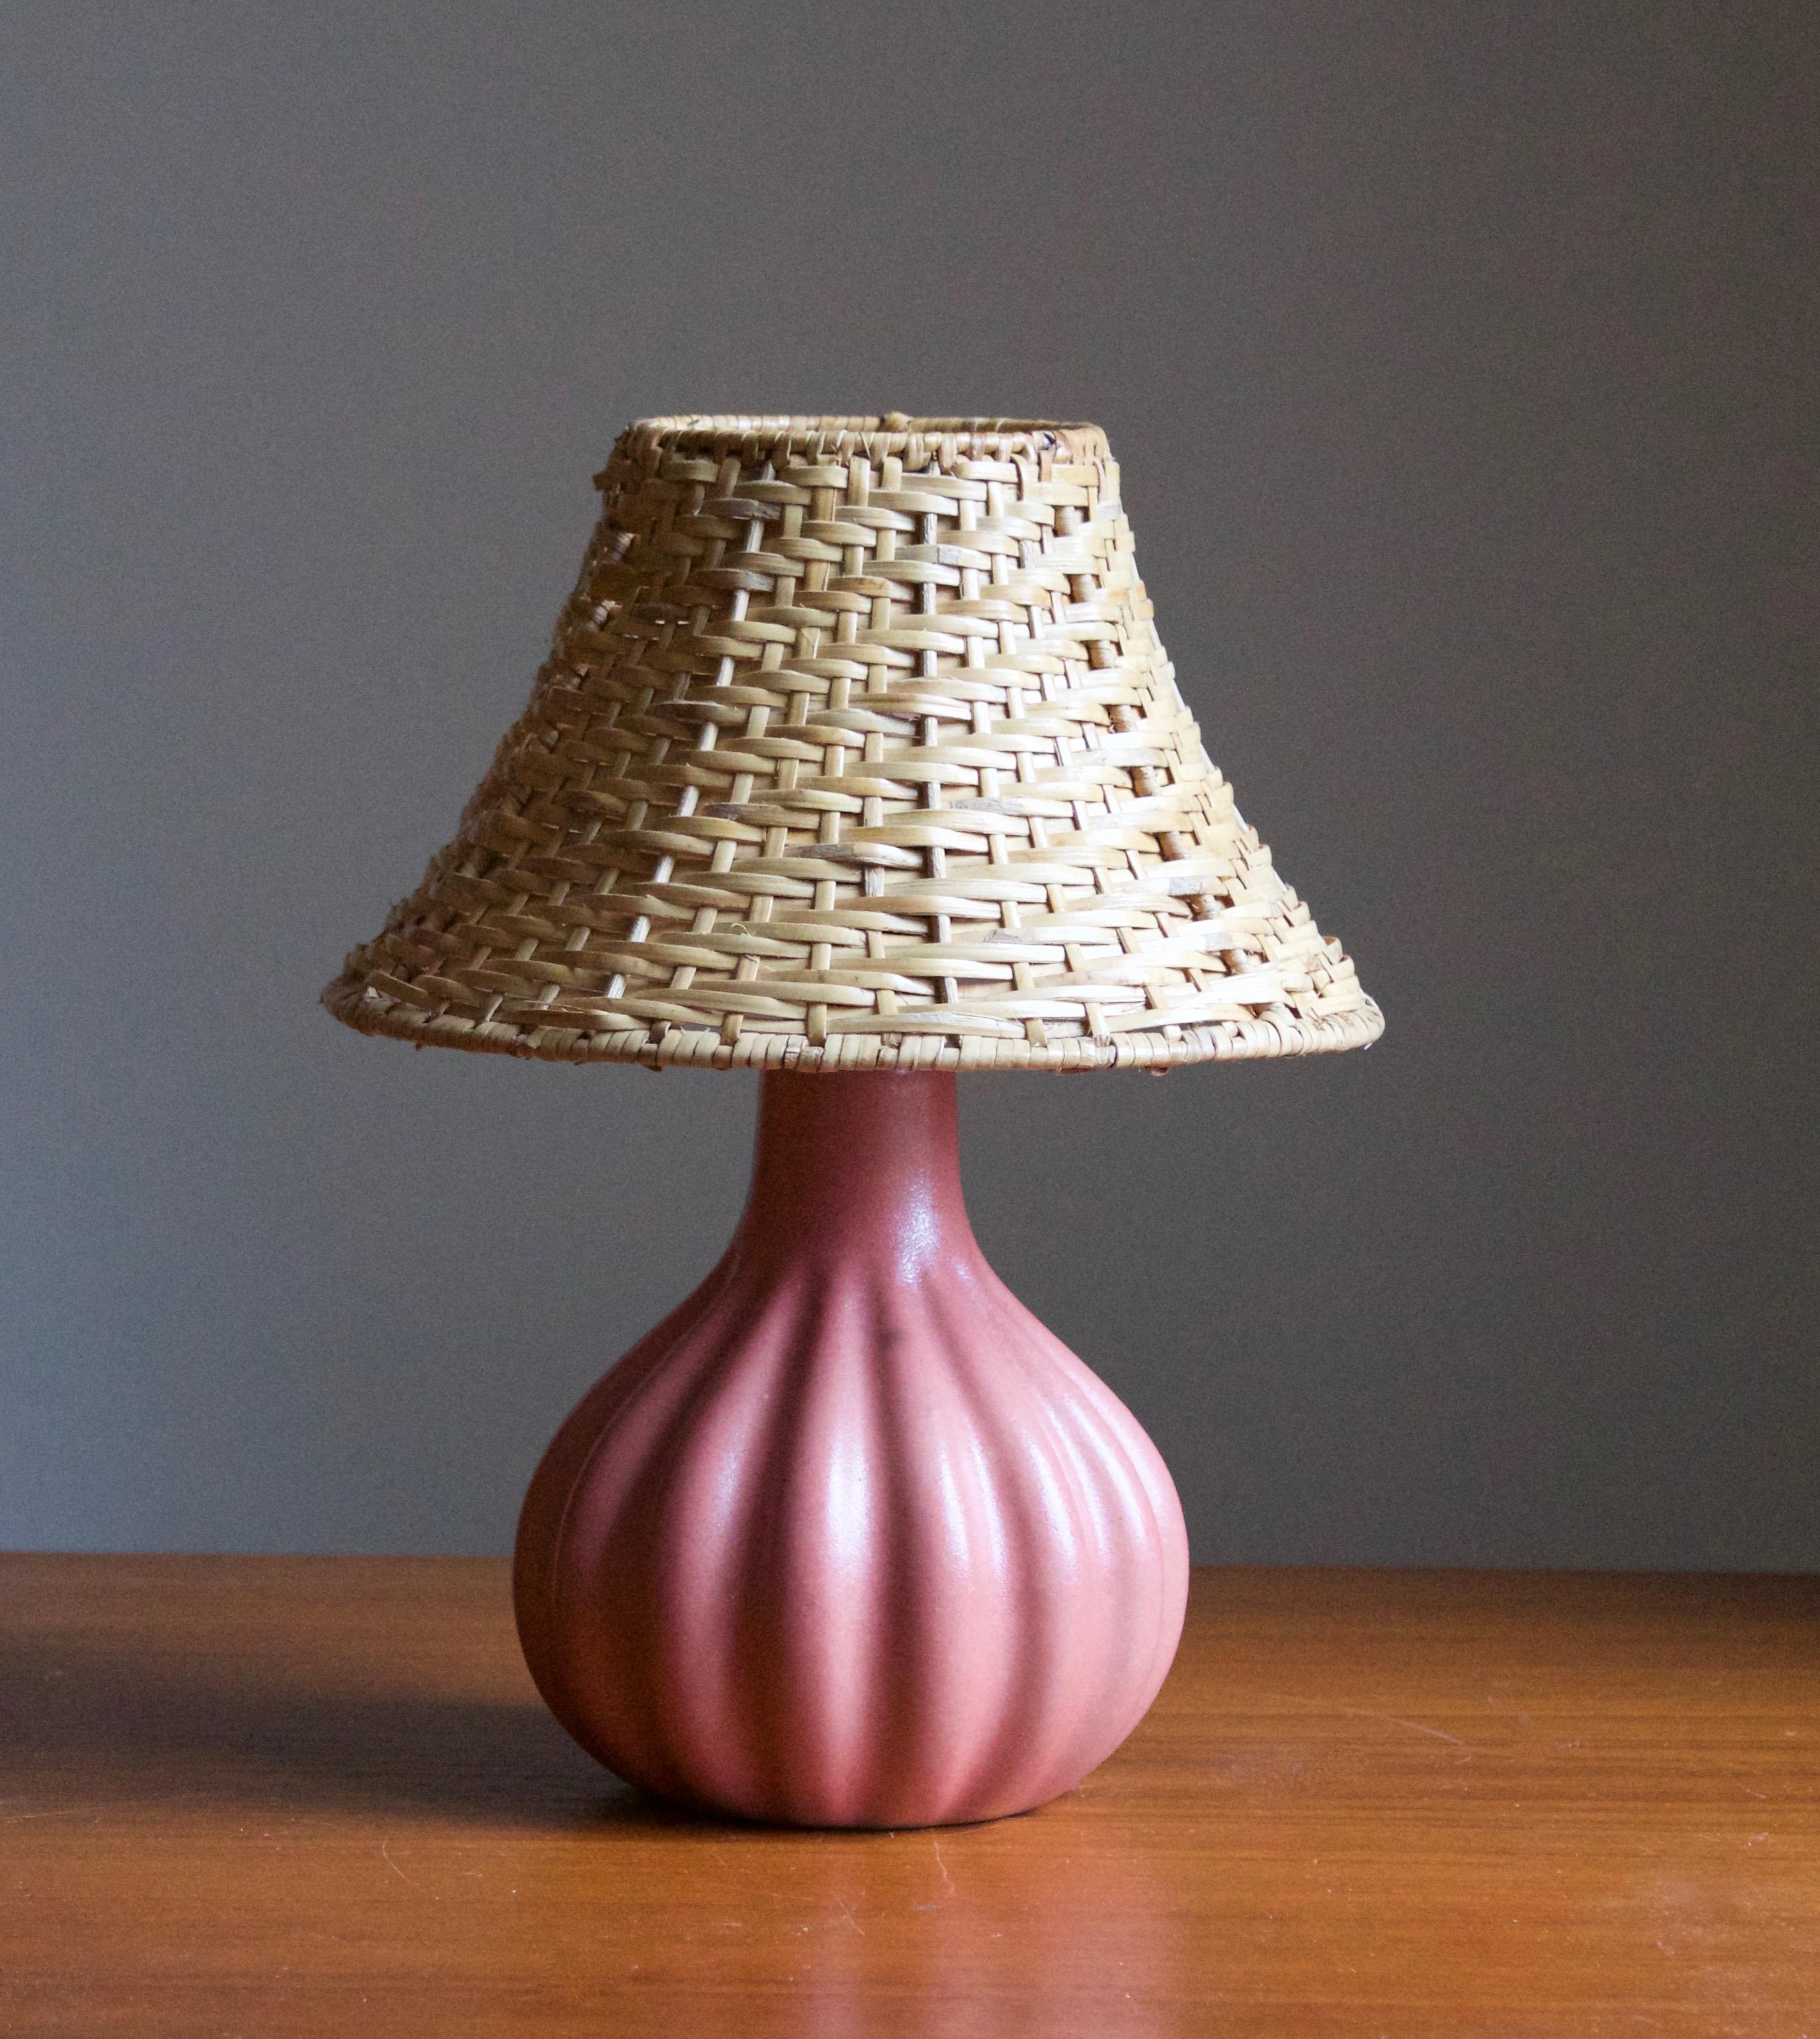 A stoneware table lamp. Produced by Ego Stengods c. 1960s-1970s. Stamped.

Stated dimensions exclude lampshade. Height including socket. Illustrated model vintage rattan lampshade can be included in purchase upon request.

Other ceramicists of